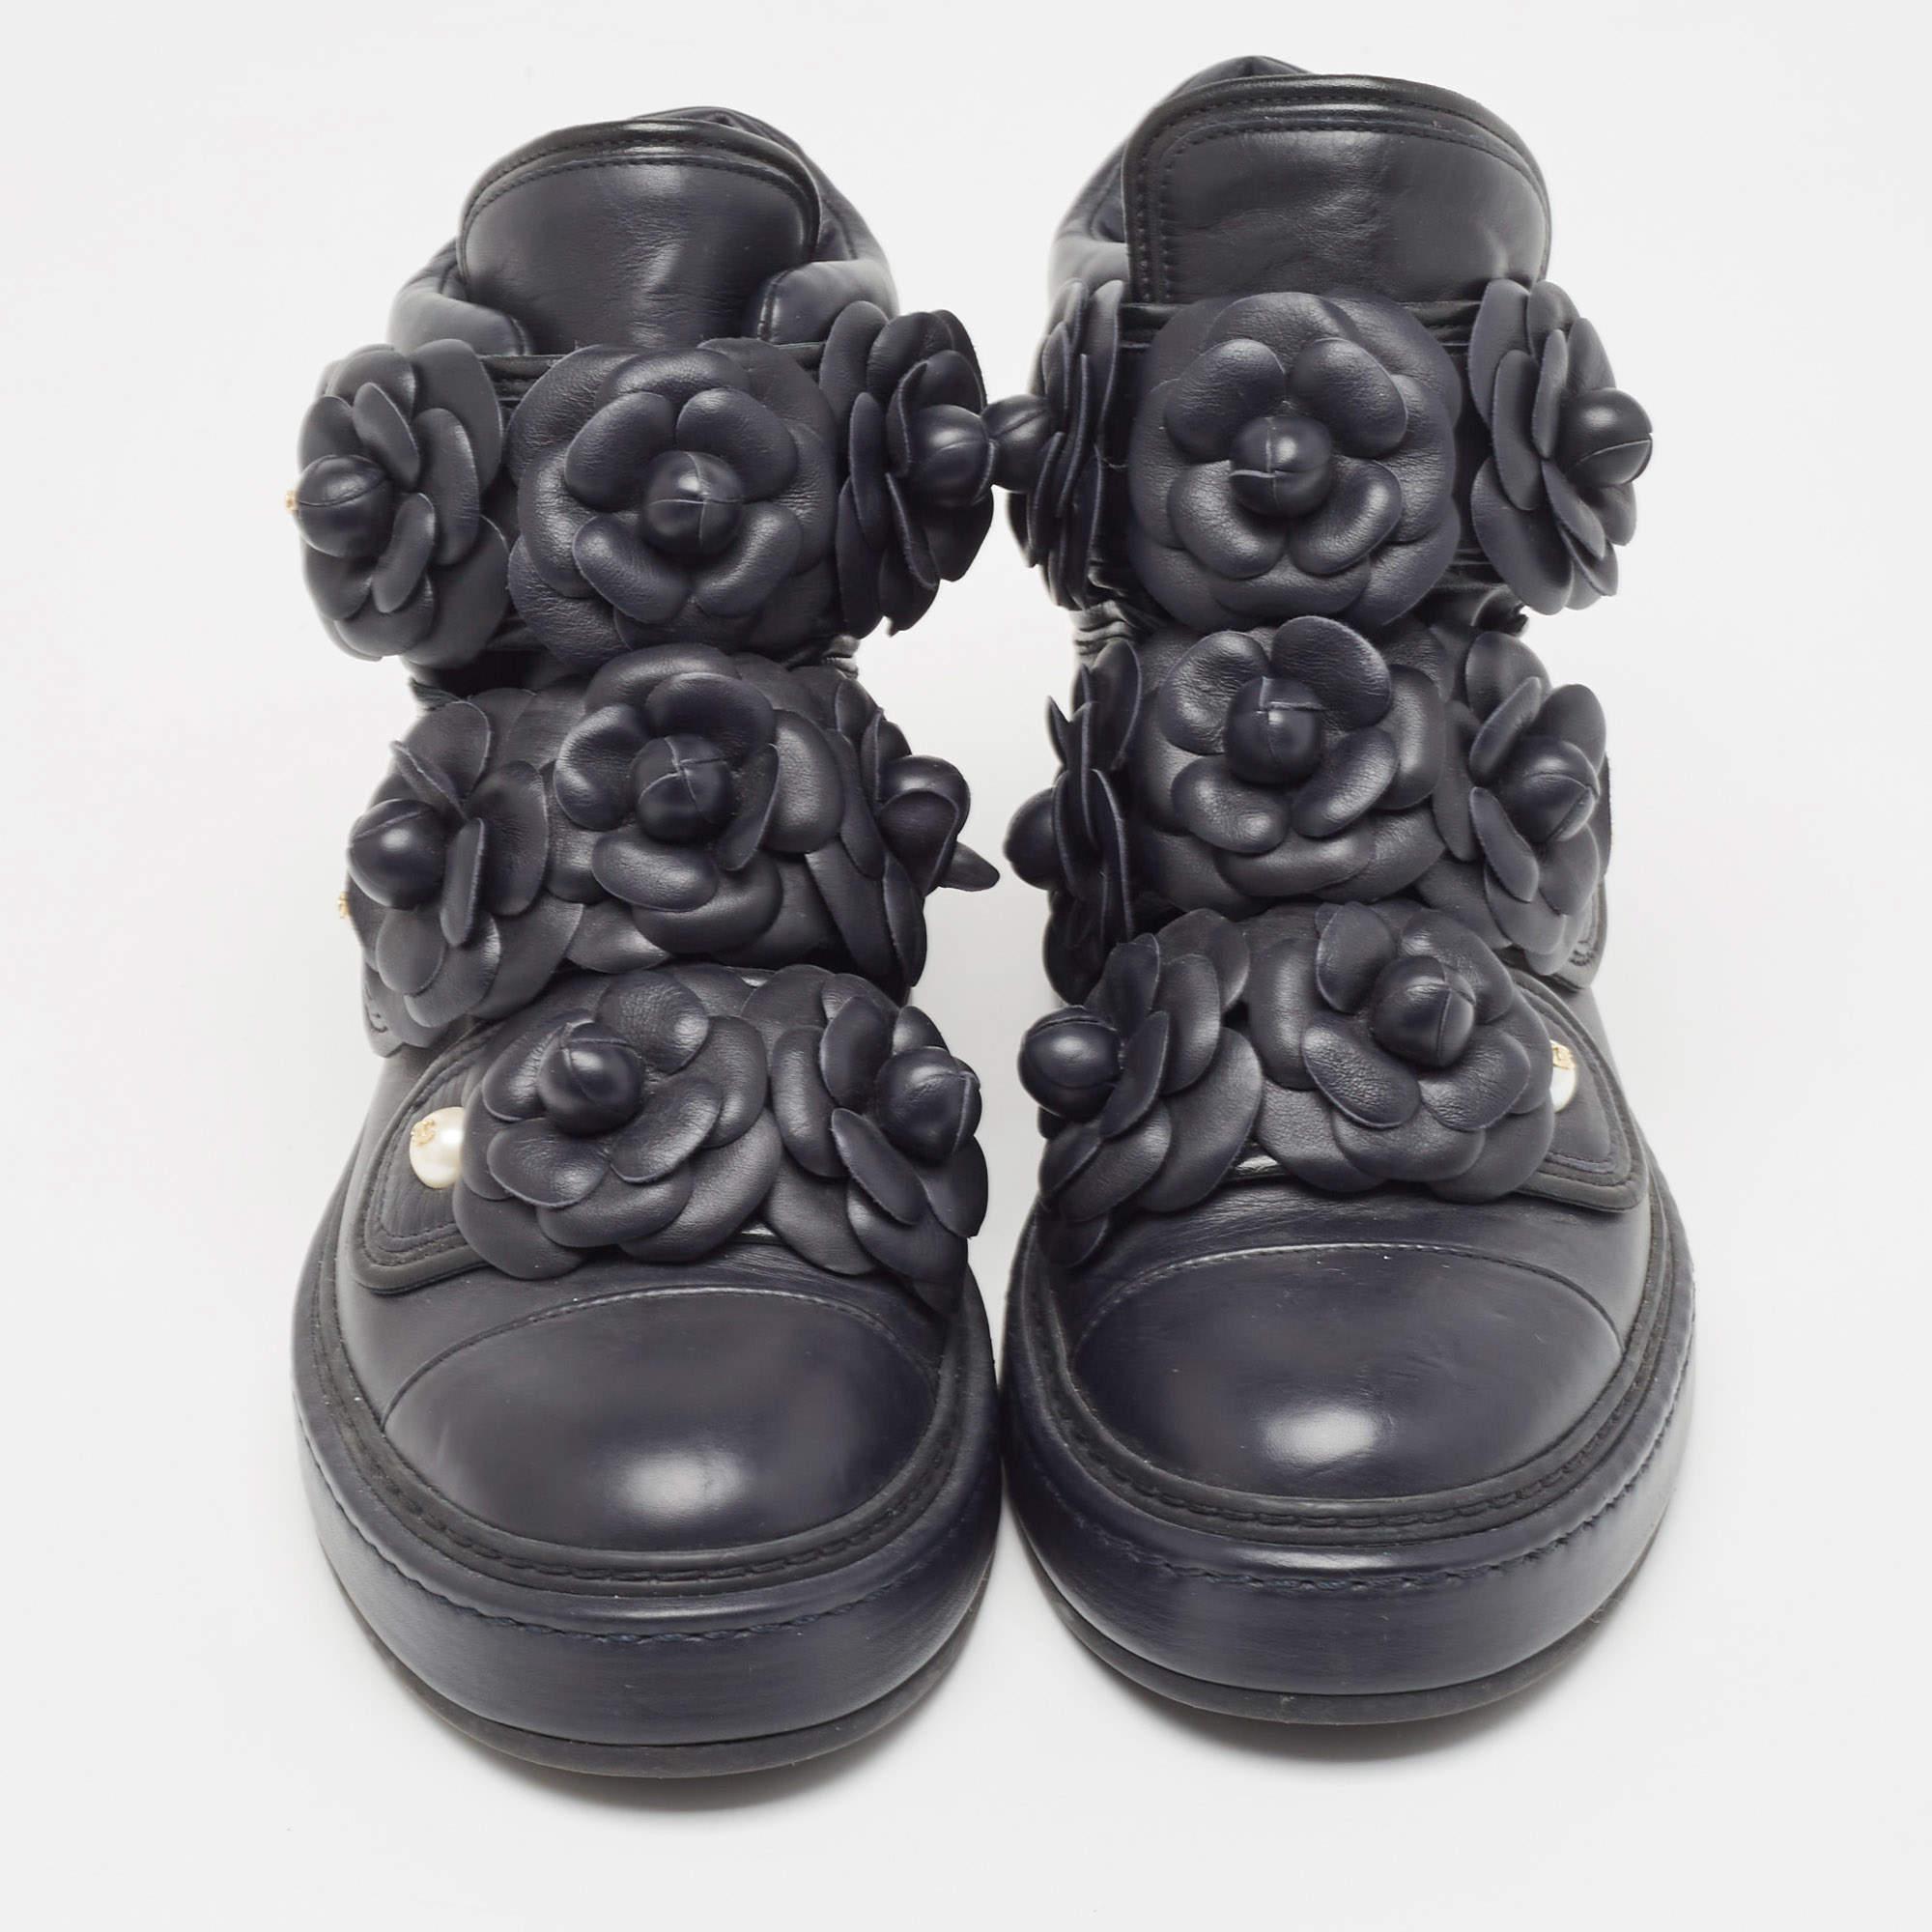 From their Spring 2016 collection, these Chanel sneakers are jaw-droppingly gorgeous. They've been crafted from leather, styled with button closure and decorated with Camellia flowers on the front. The Camellia was a favourite of 